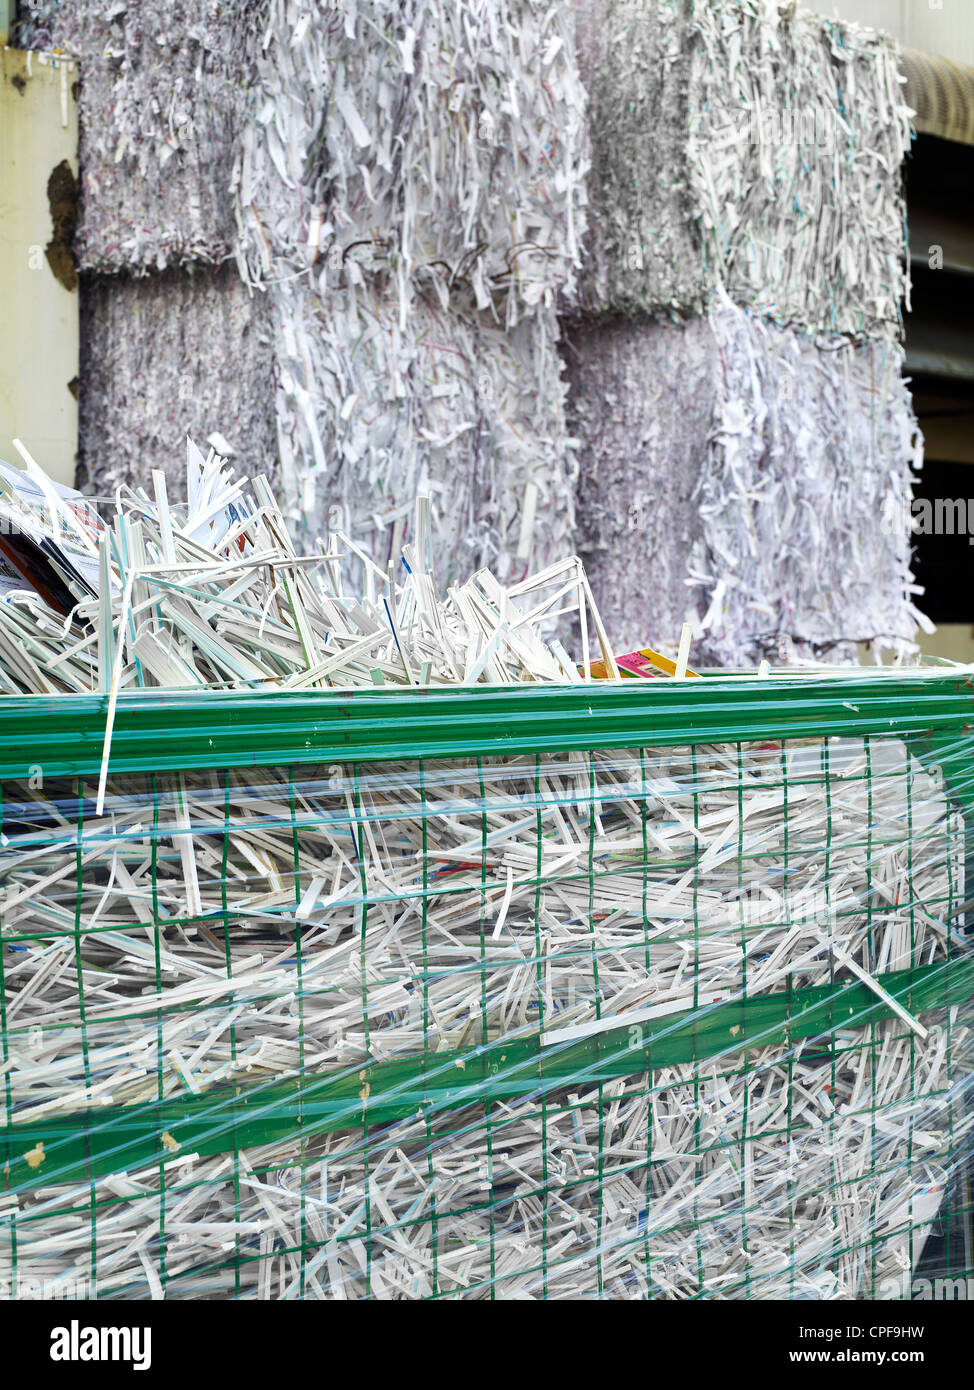 Recycled paper and waste from a printing press in Johor, Malaysia. Stock Photo